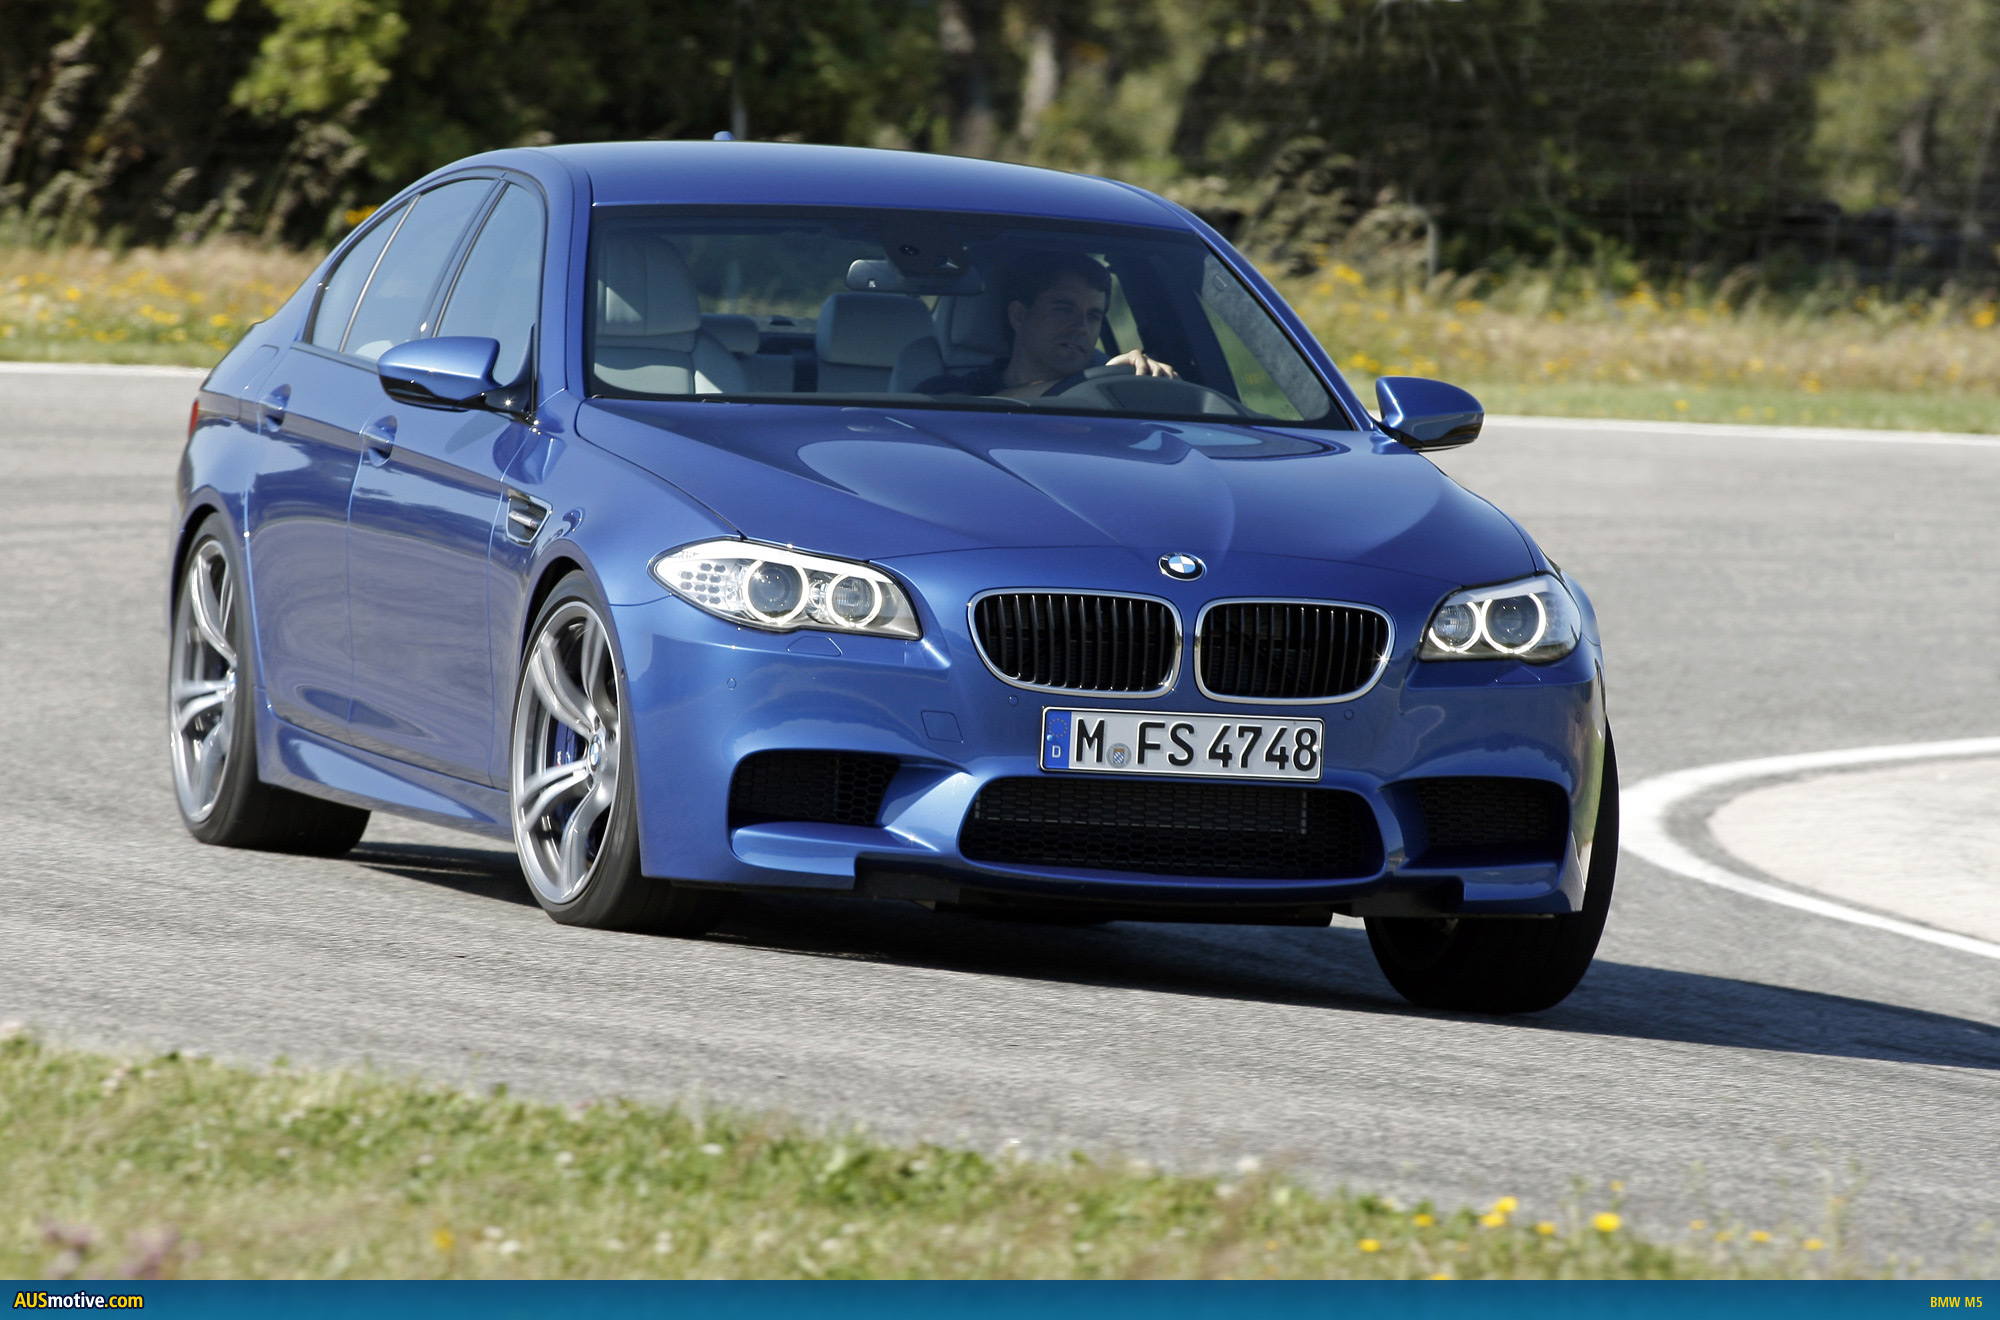 Driving Luxury: The 2012 BMW M5